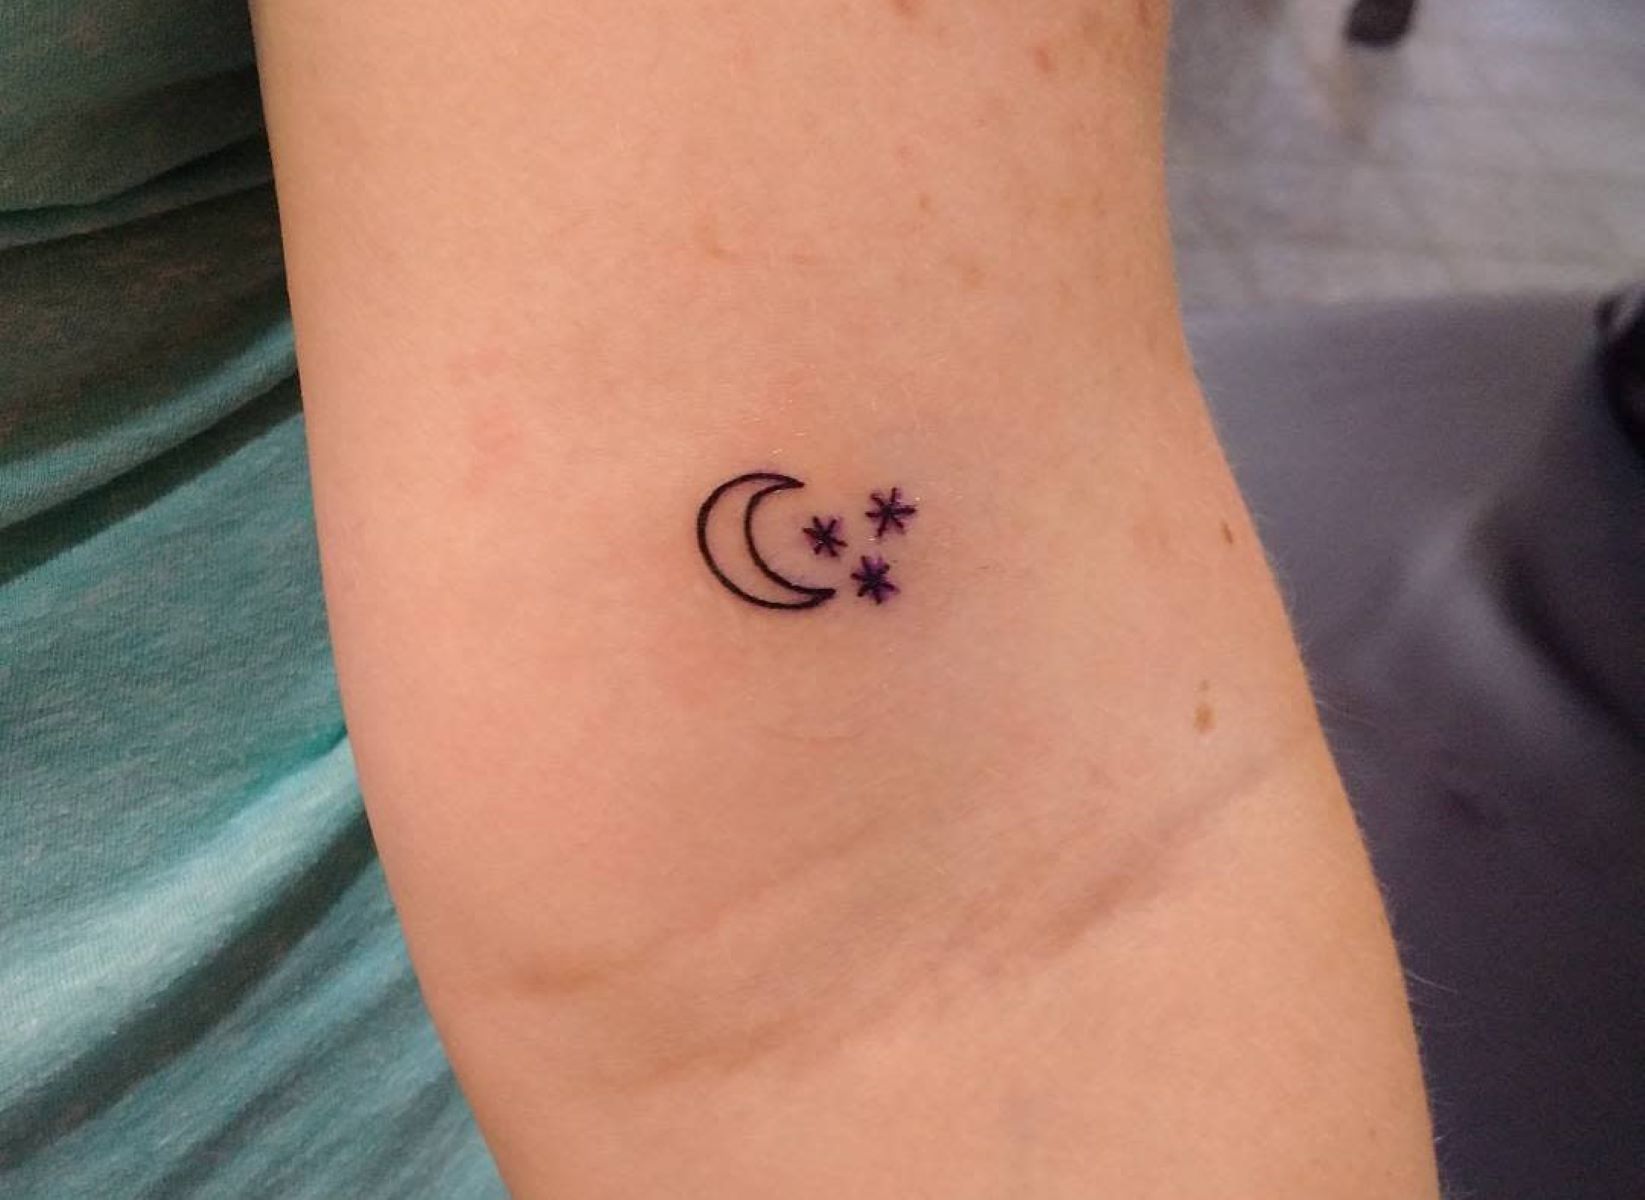 The Hidden Meaning Behind A Dream Tattoo: A Crescent Moon And Three Stars On The Wrist